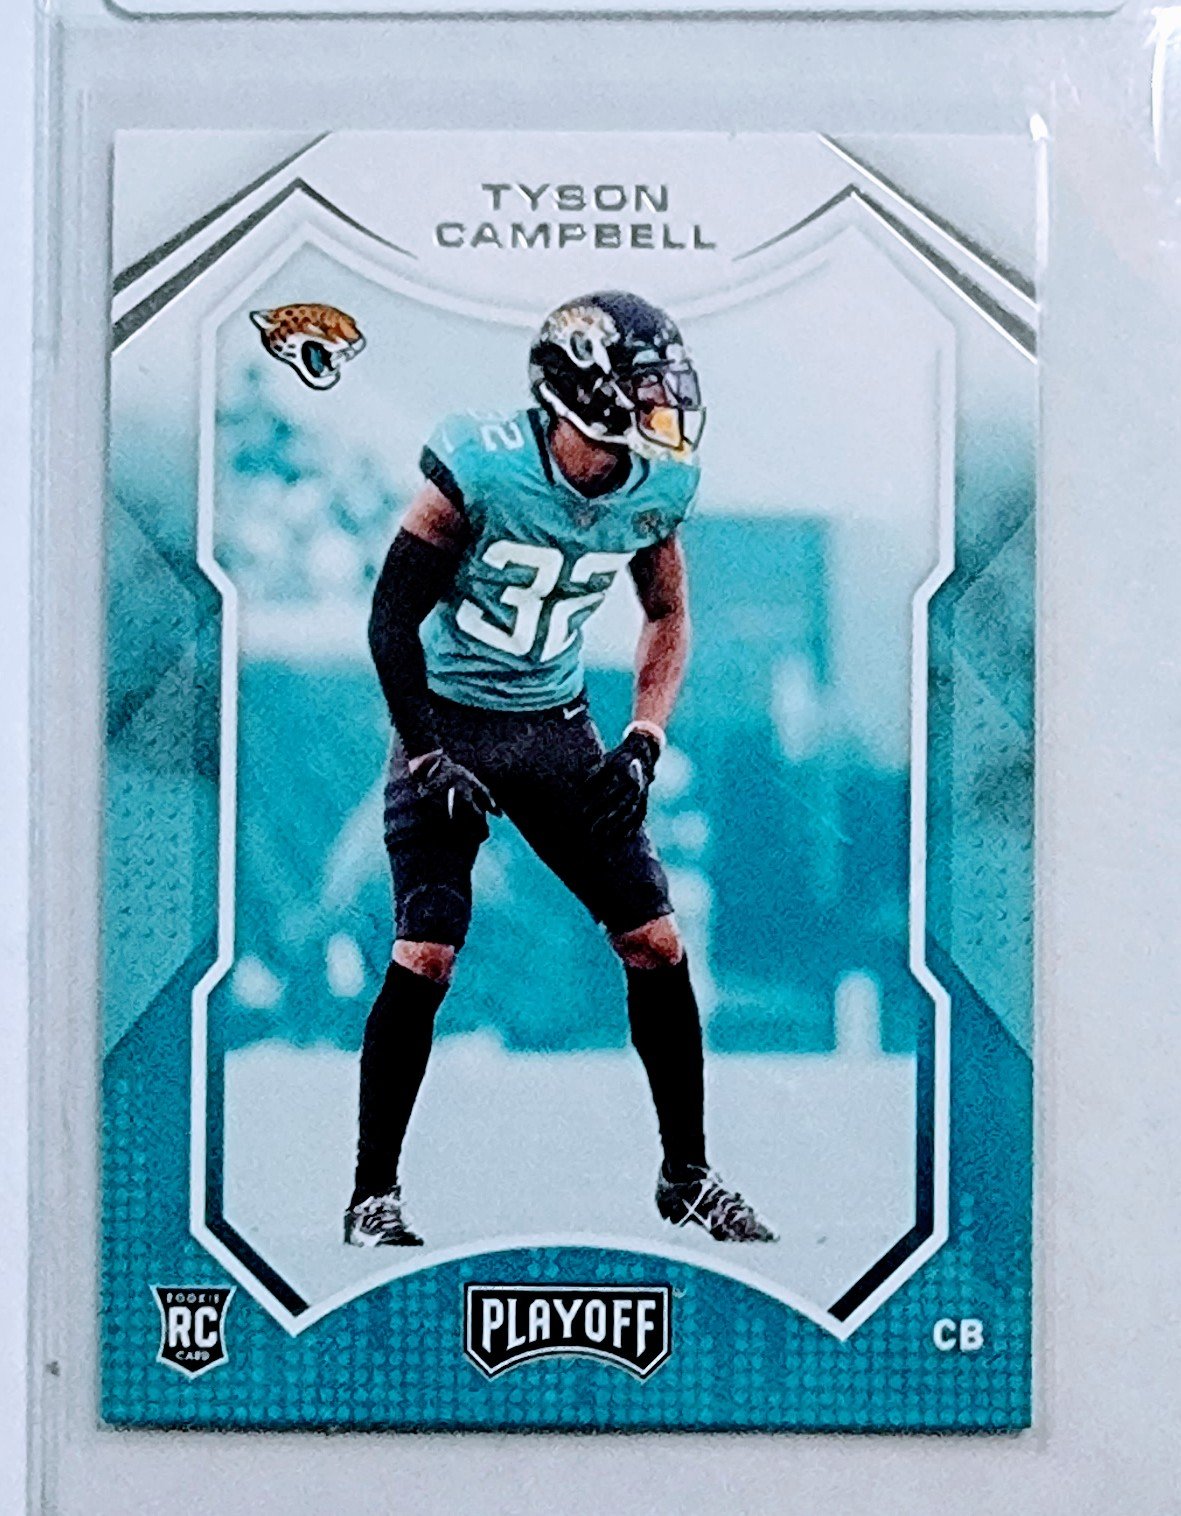 2021 Panini Rookies and Stars Tyson Campbell Rookie Football Card AVM1 simple Xclusive Collectibles   